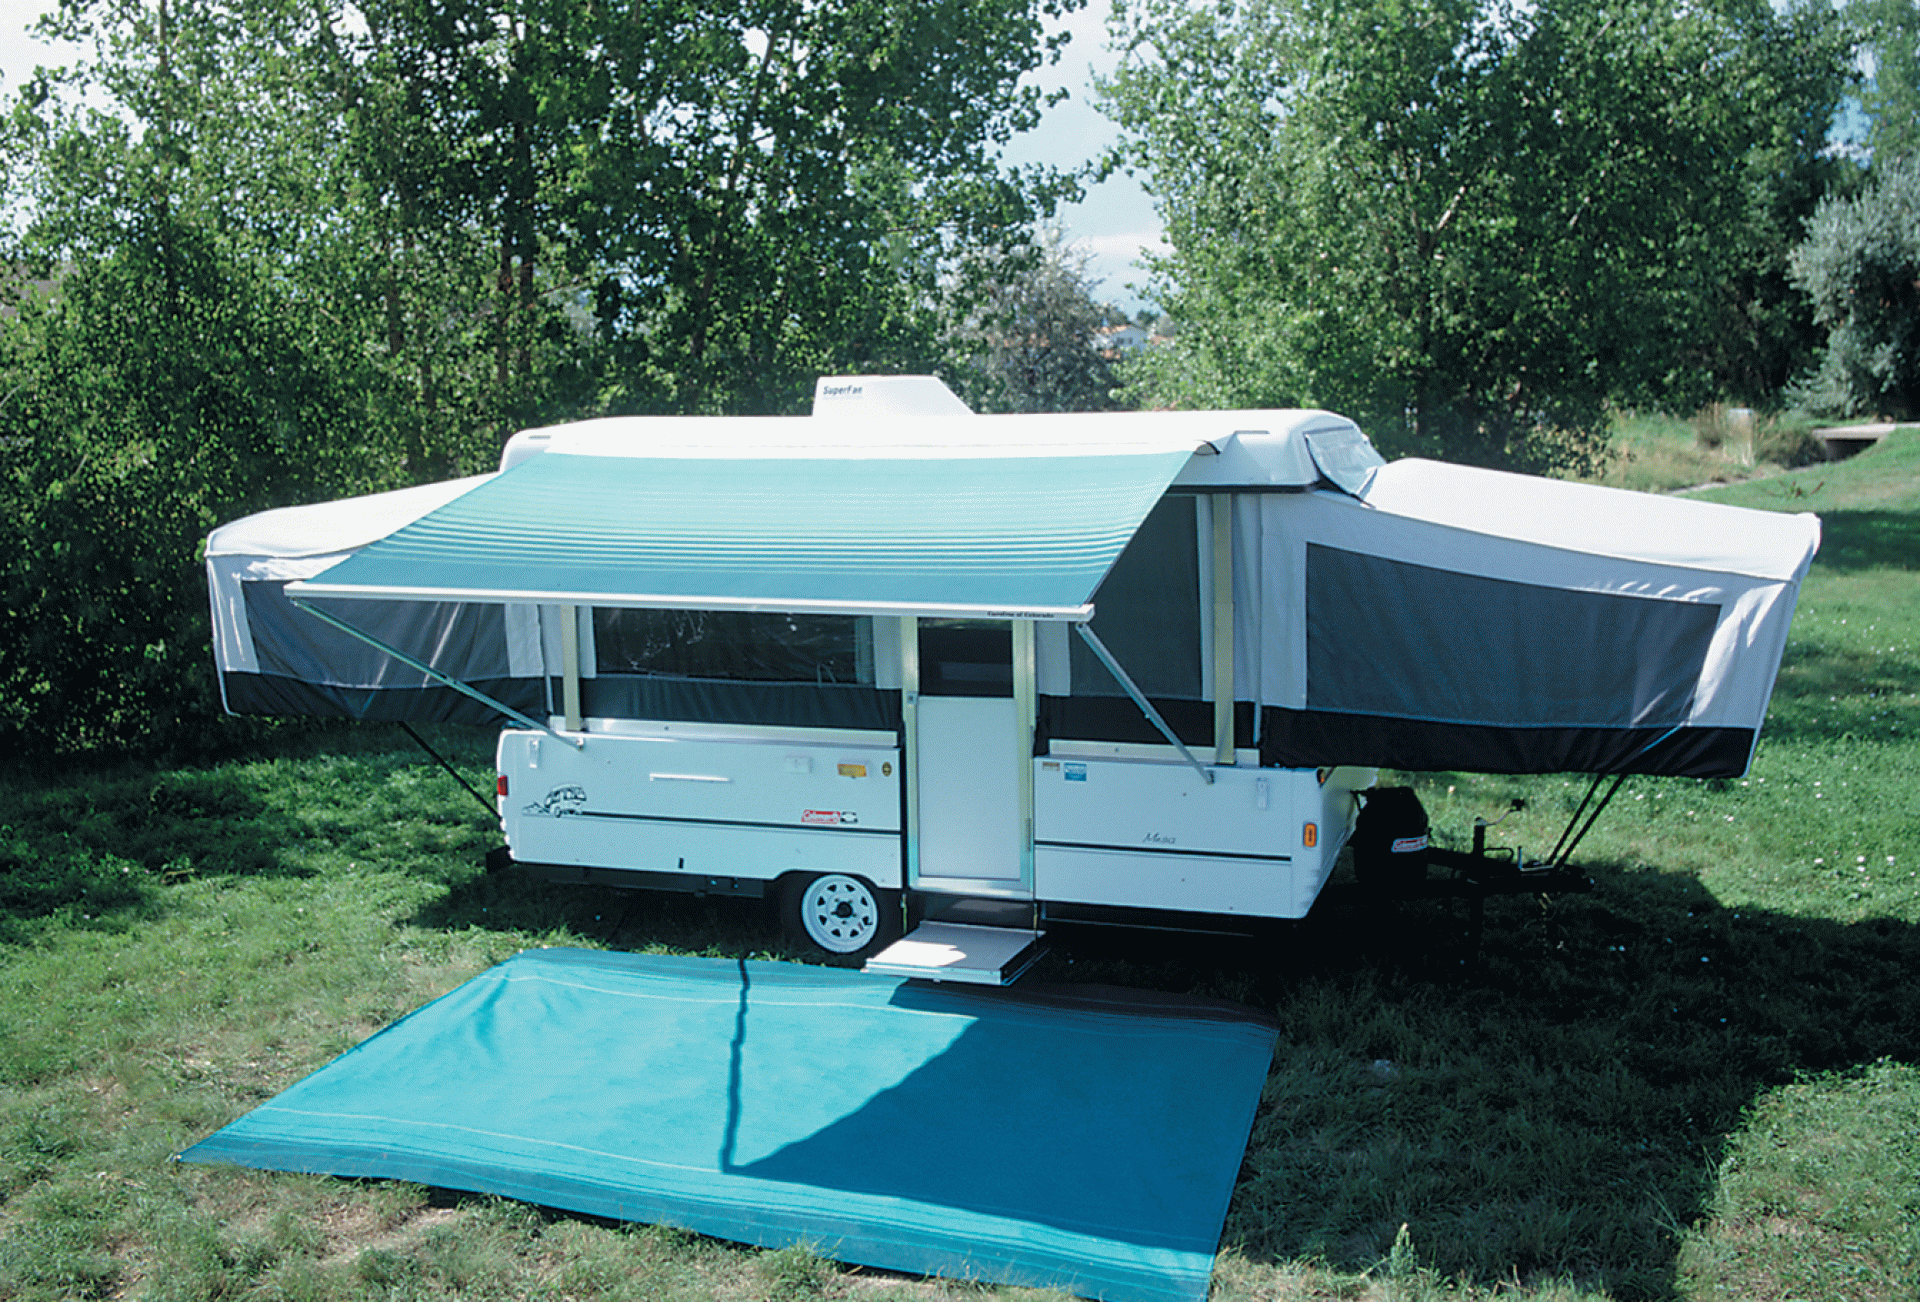 CAREFREE OF COLORADO | 981388B00 | Campout Awning Metric 3.5 Metric 11' 6" Bordeaux Dune Stripe with White Bag